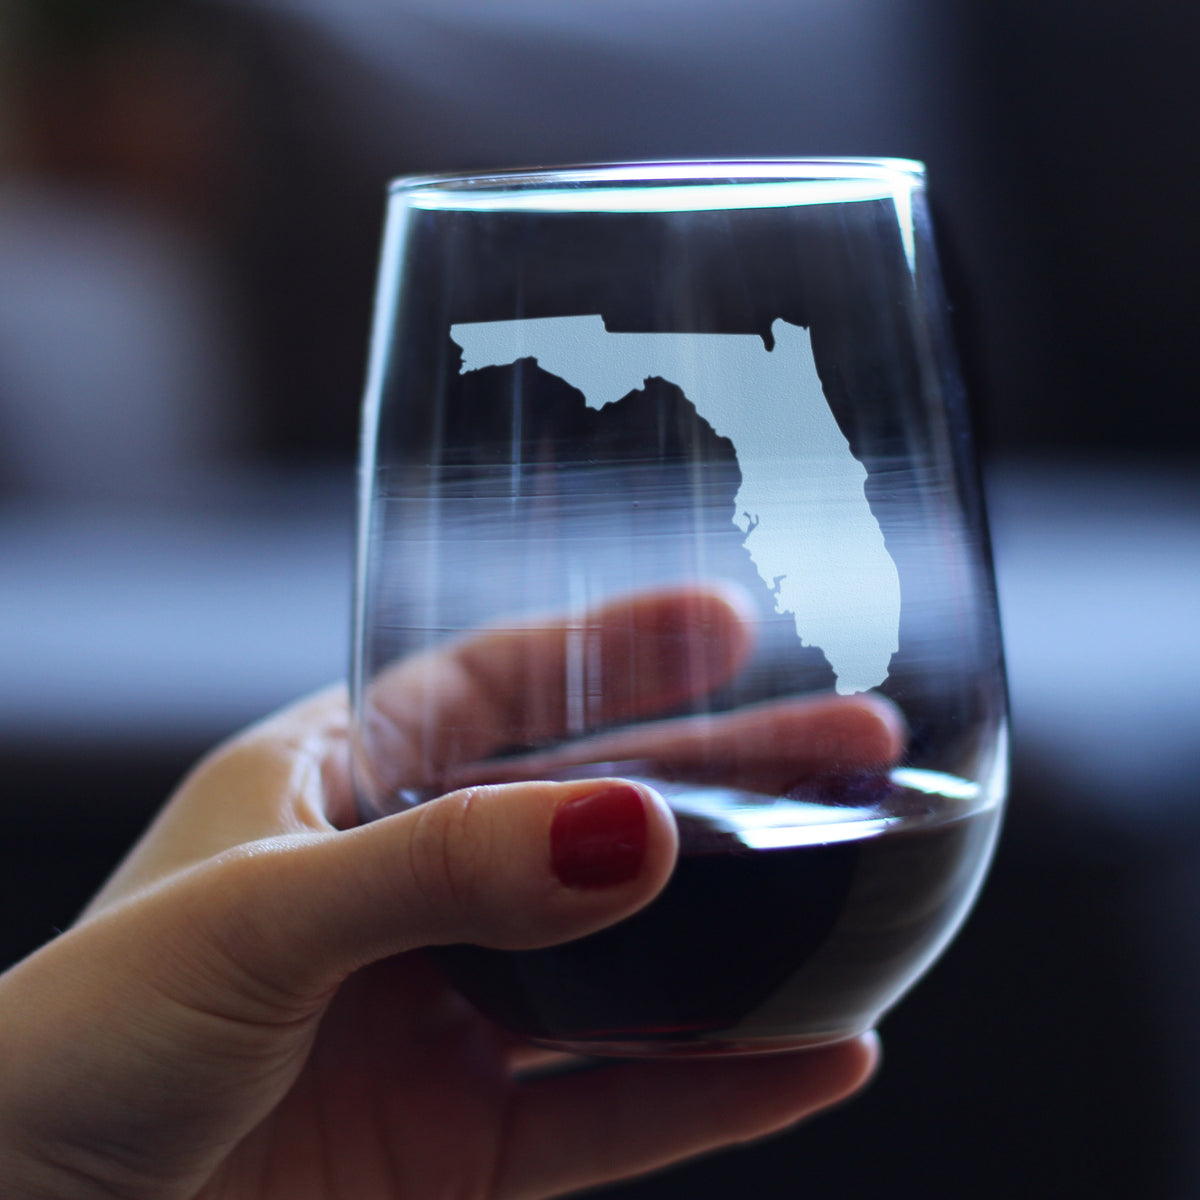 Florida State Outline Stemless Wine Glass - State Themed Drinking Decor and Gifts for Floridian Women &amp; Men - Large 17 Oz Glasses